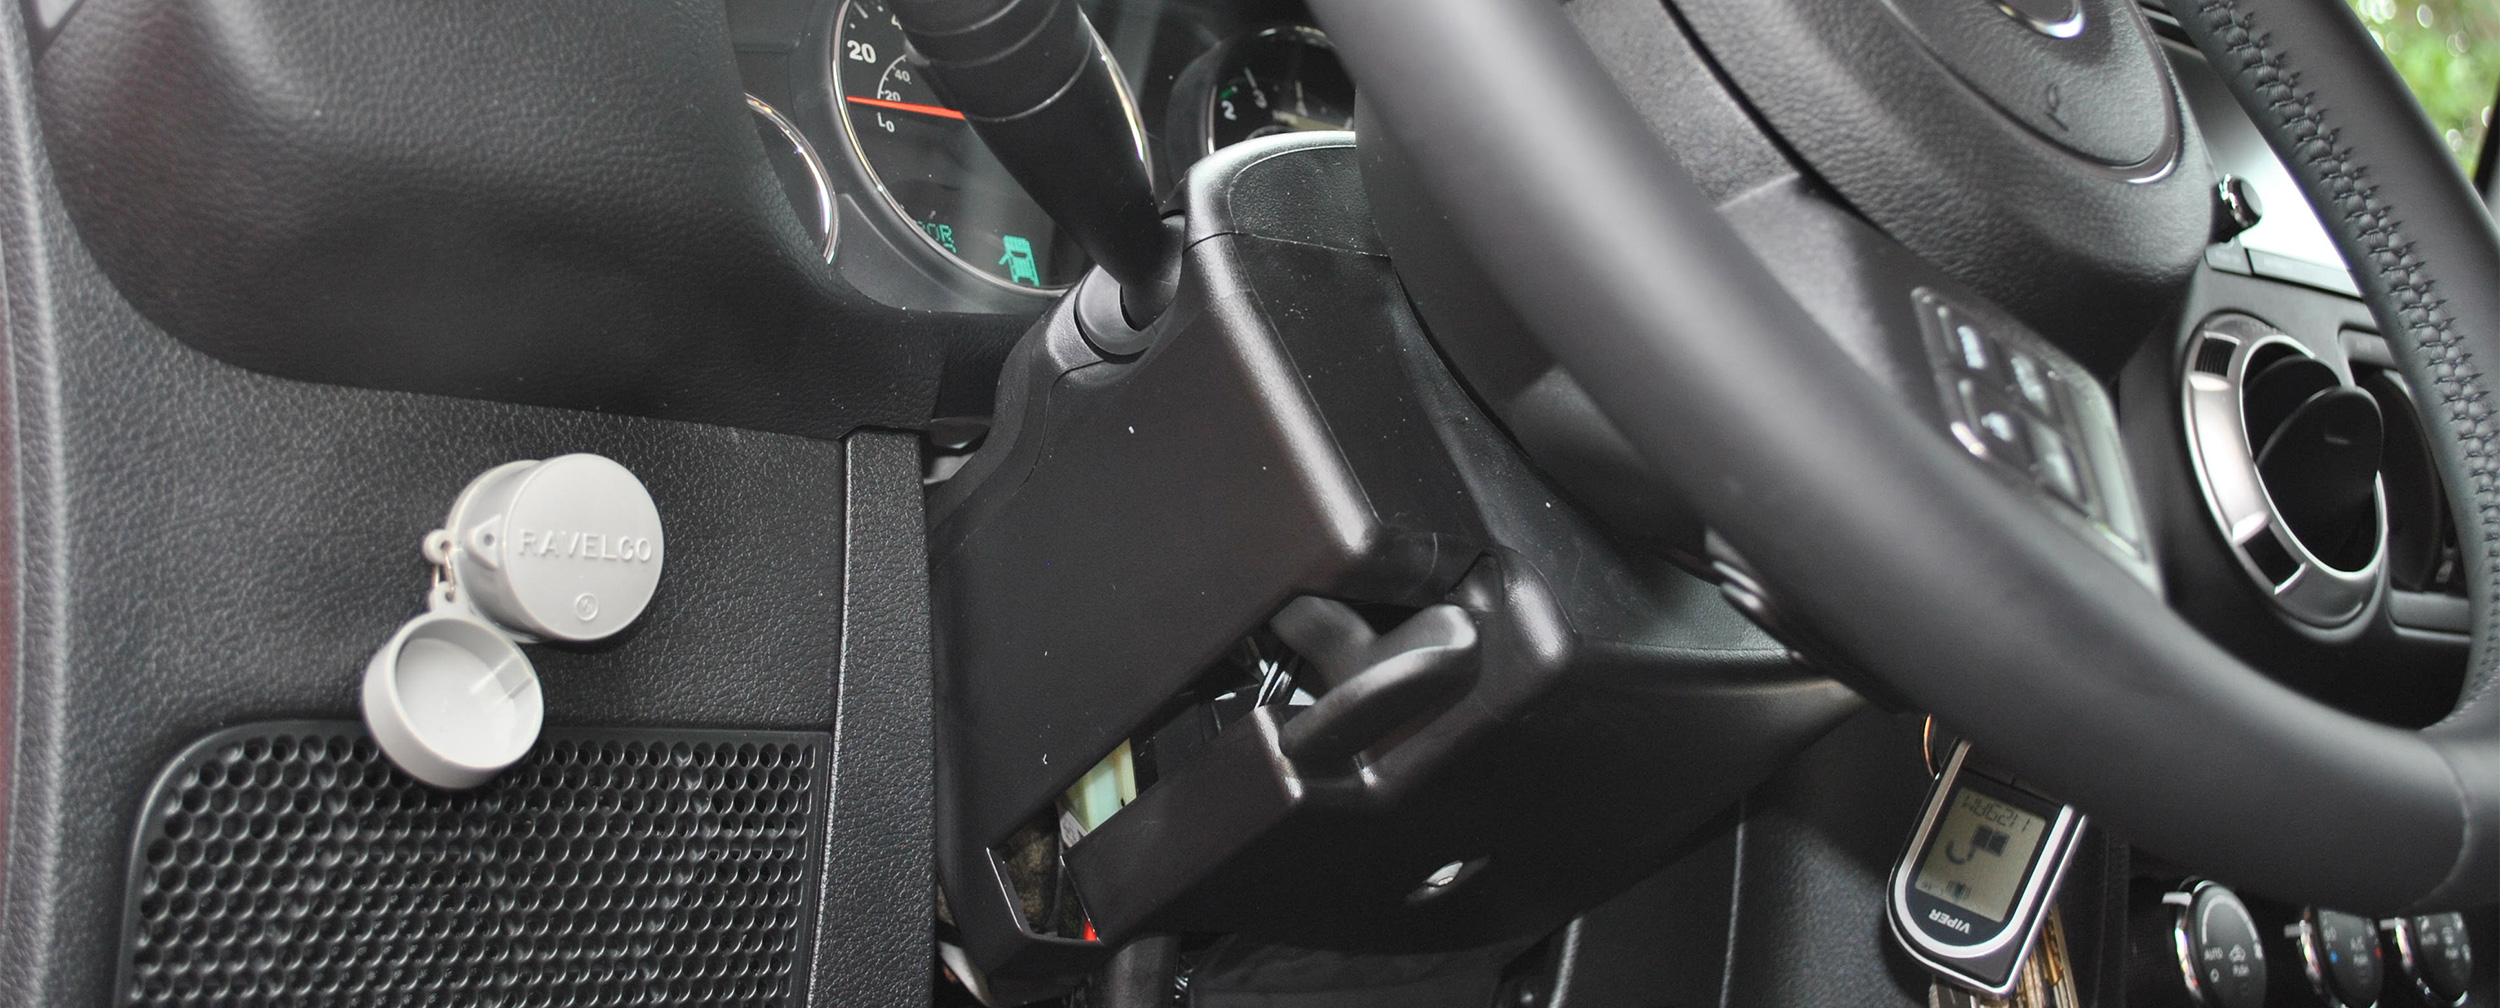 Ravelco installed in a vehicle dashboard